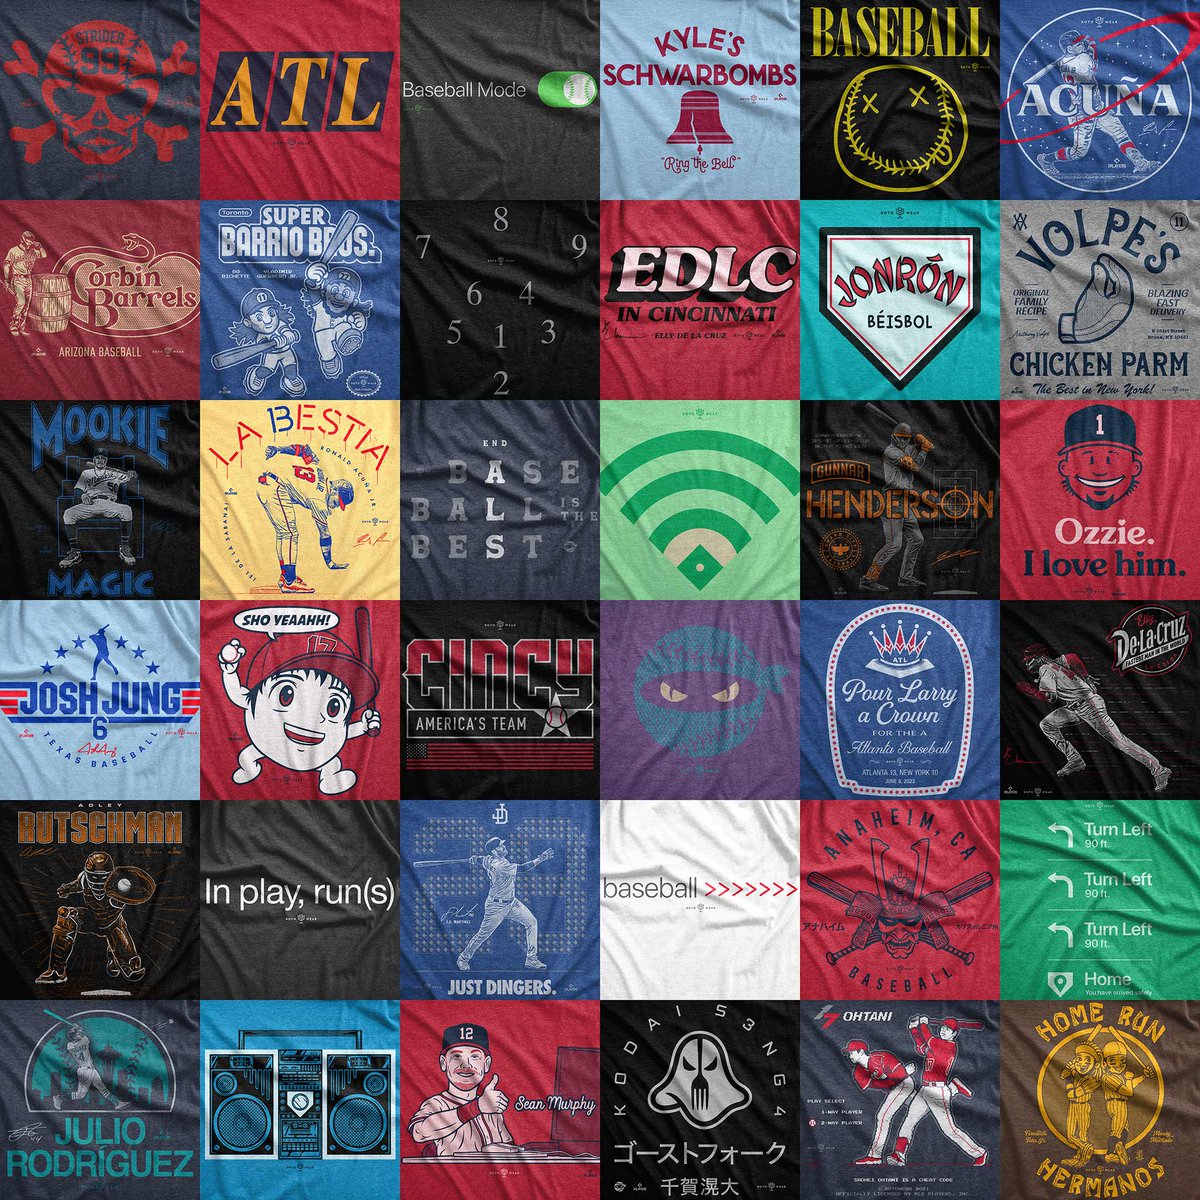 FREE 👕 GIVEAWAY! ✅ FOLLOW 🔄 RETWEET ❤️ LIKE For a chance to win a free shirt from our Baseball collection! rotowear.com/collections/ba… ⏳ Winner announced 7/25